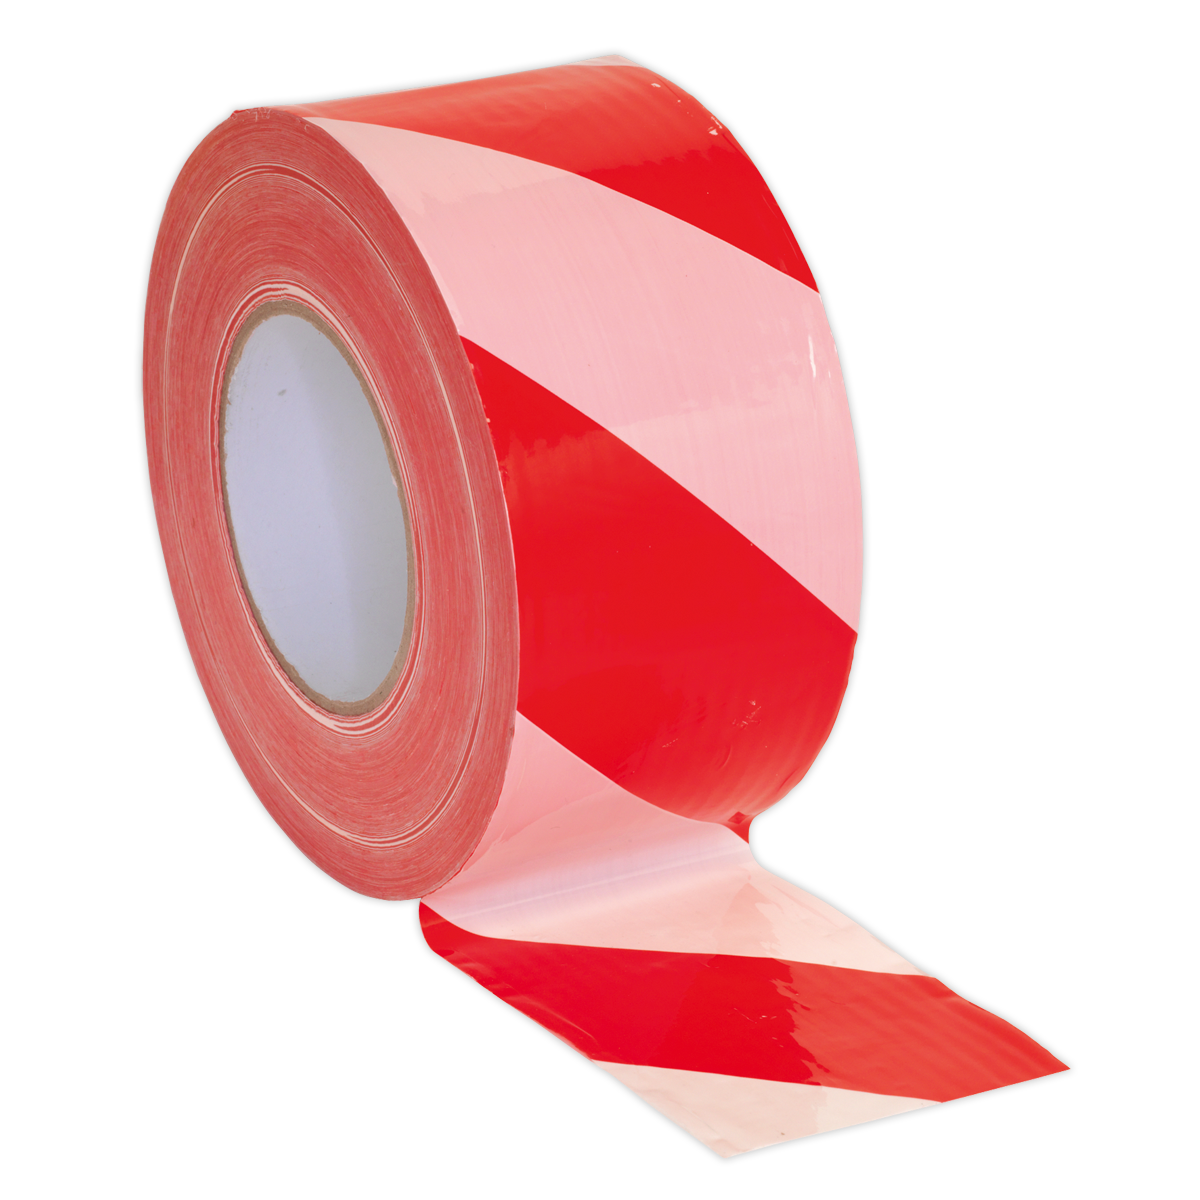 Sealey Hazard Warning Barrier Tape 80mm x 100m Red/White Non-Adhesive